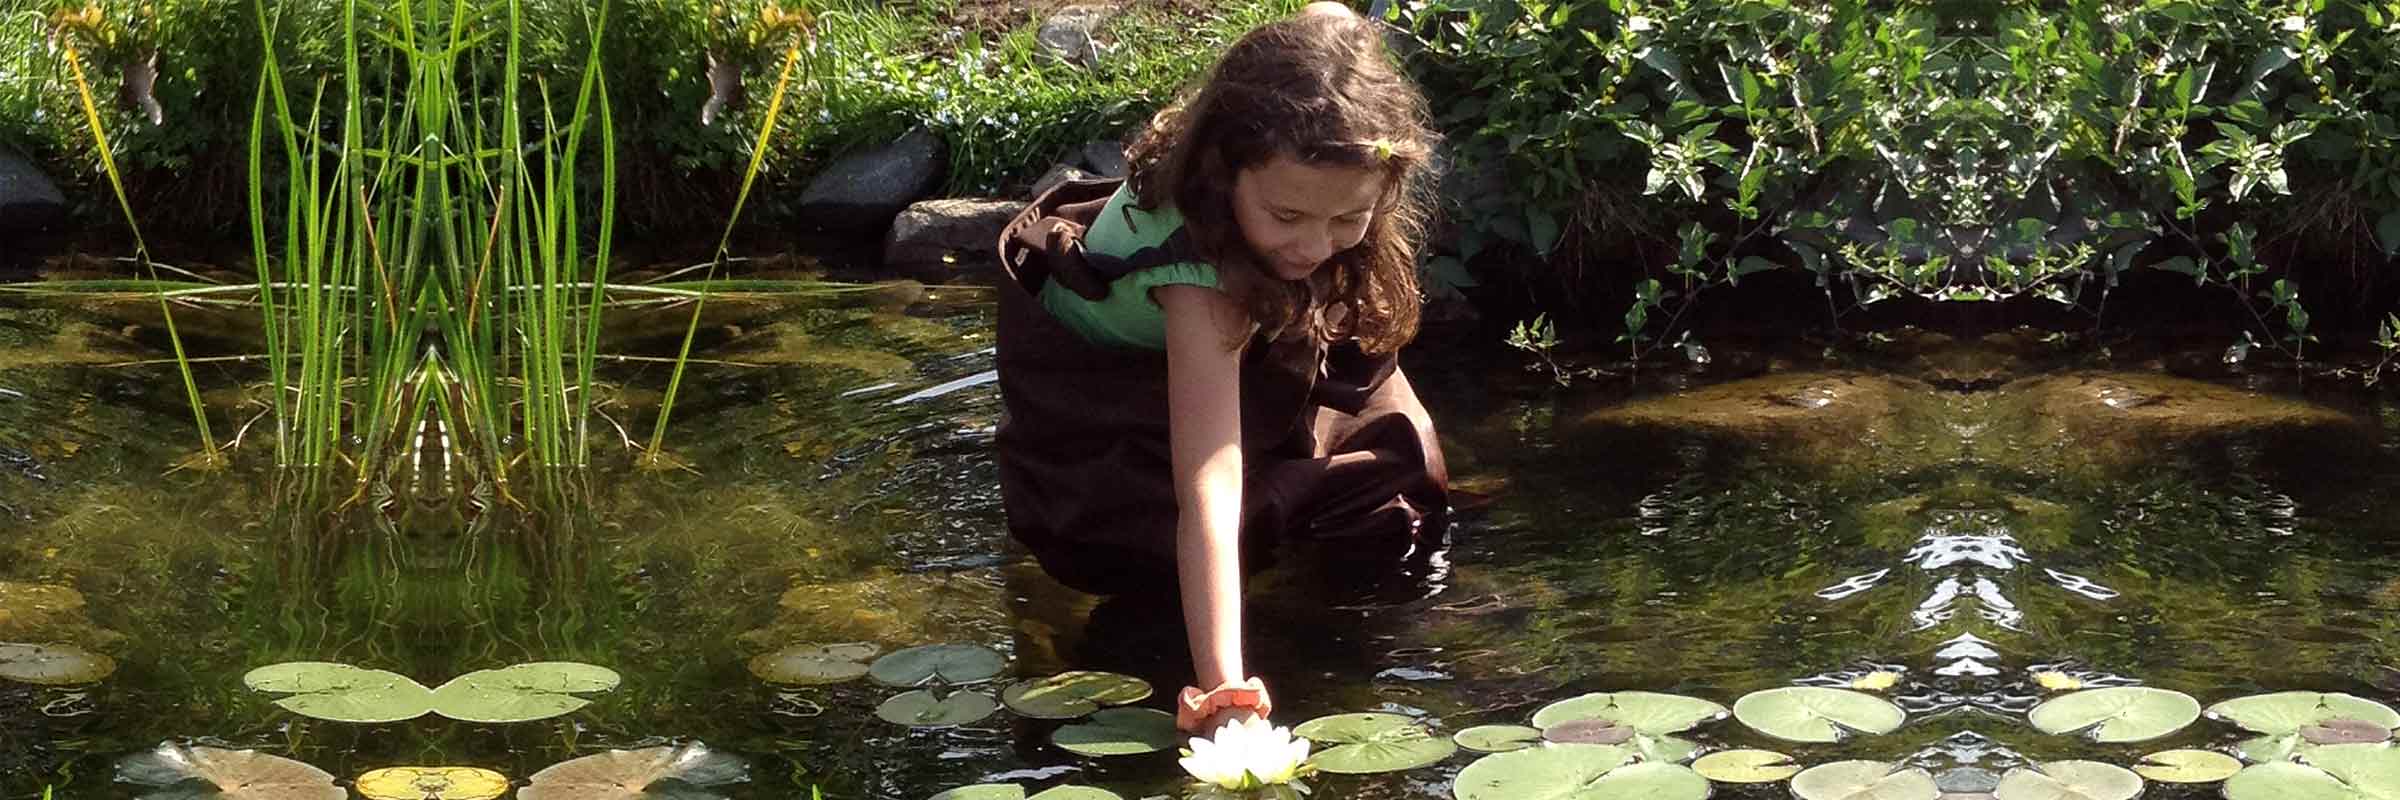 Young girl wading in lake reaches for lily pads